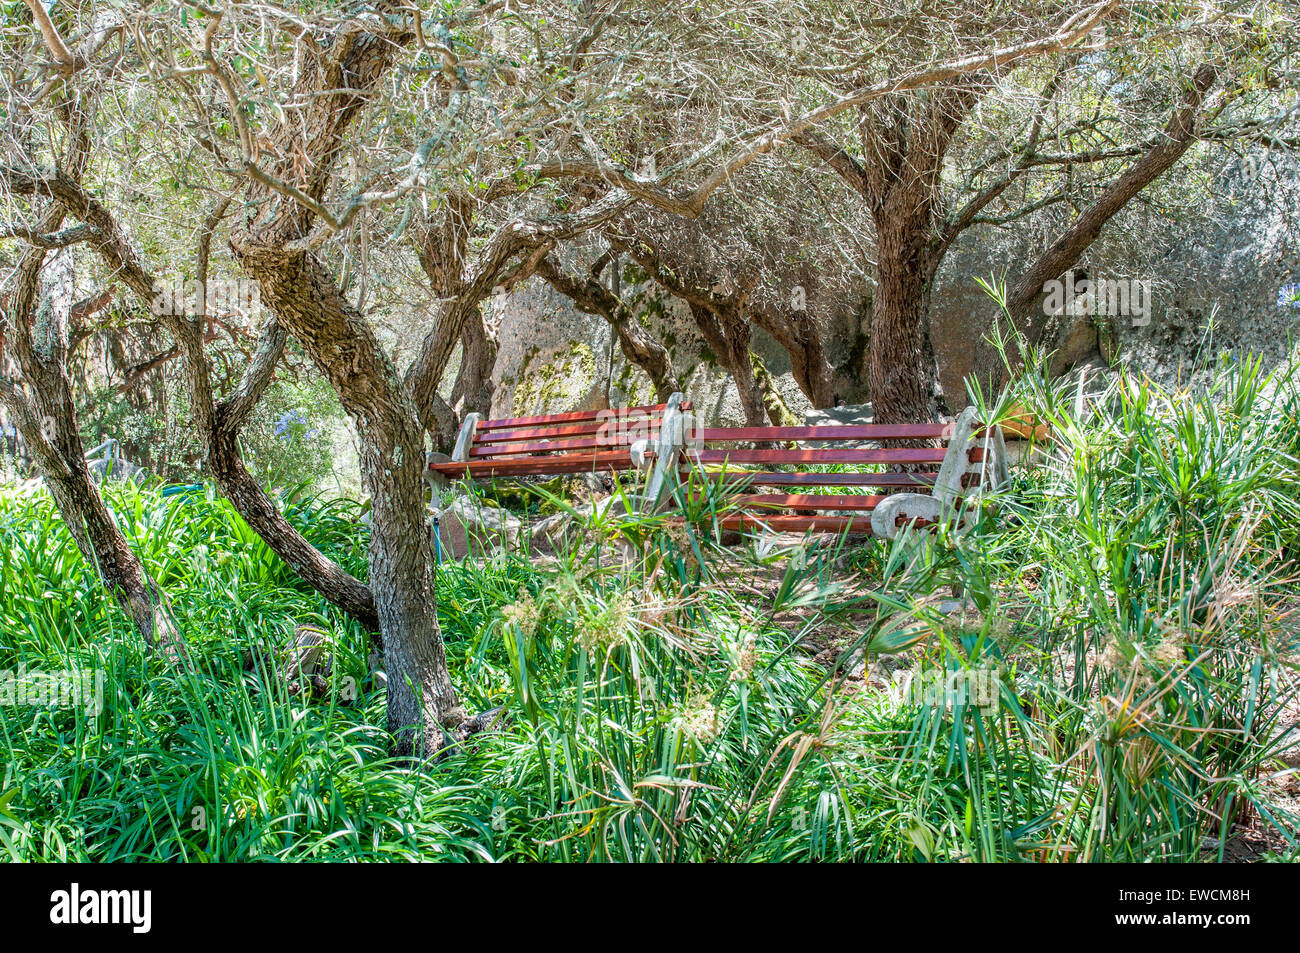 Shady resting spot at the Afrikaans Language Monument in Paarl, South Africa Stock Photo